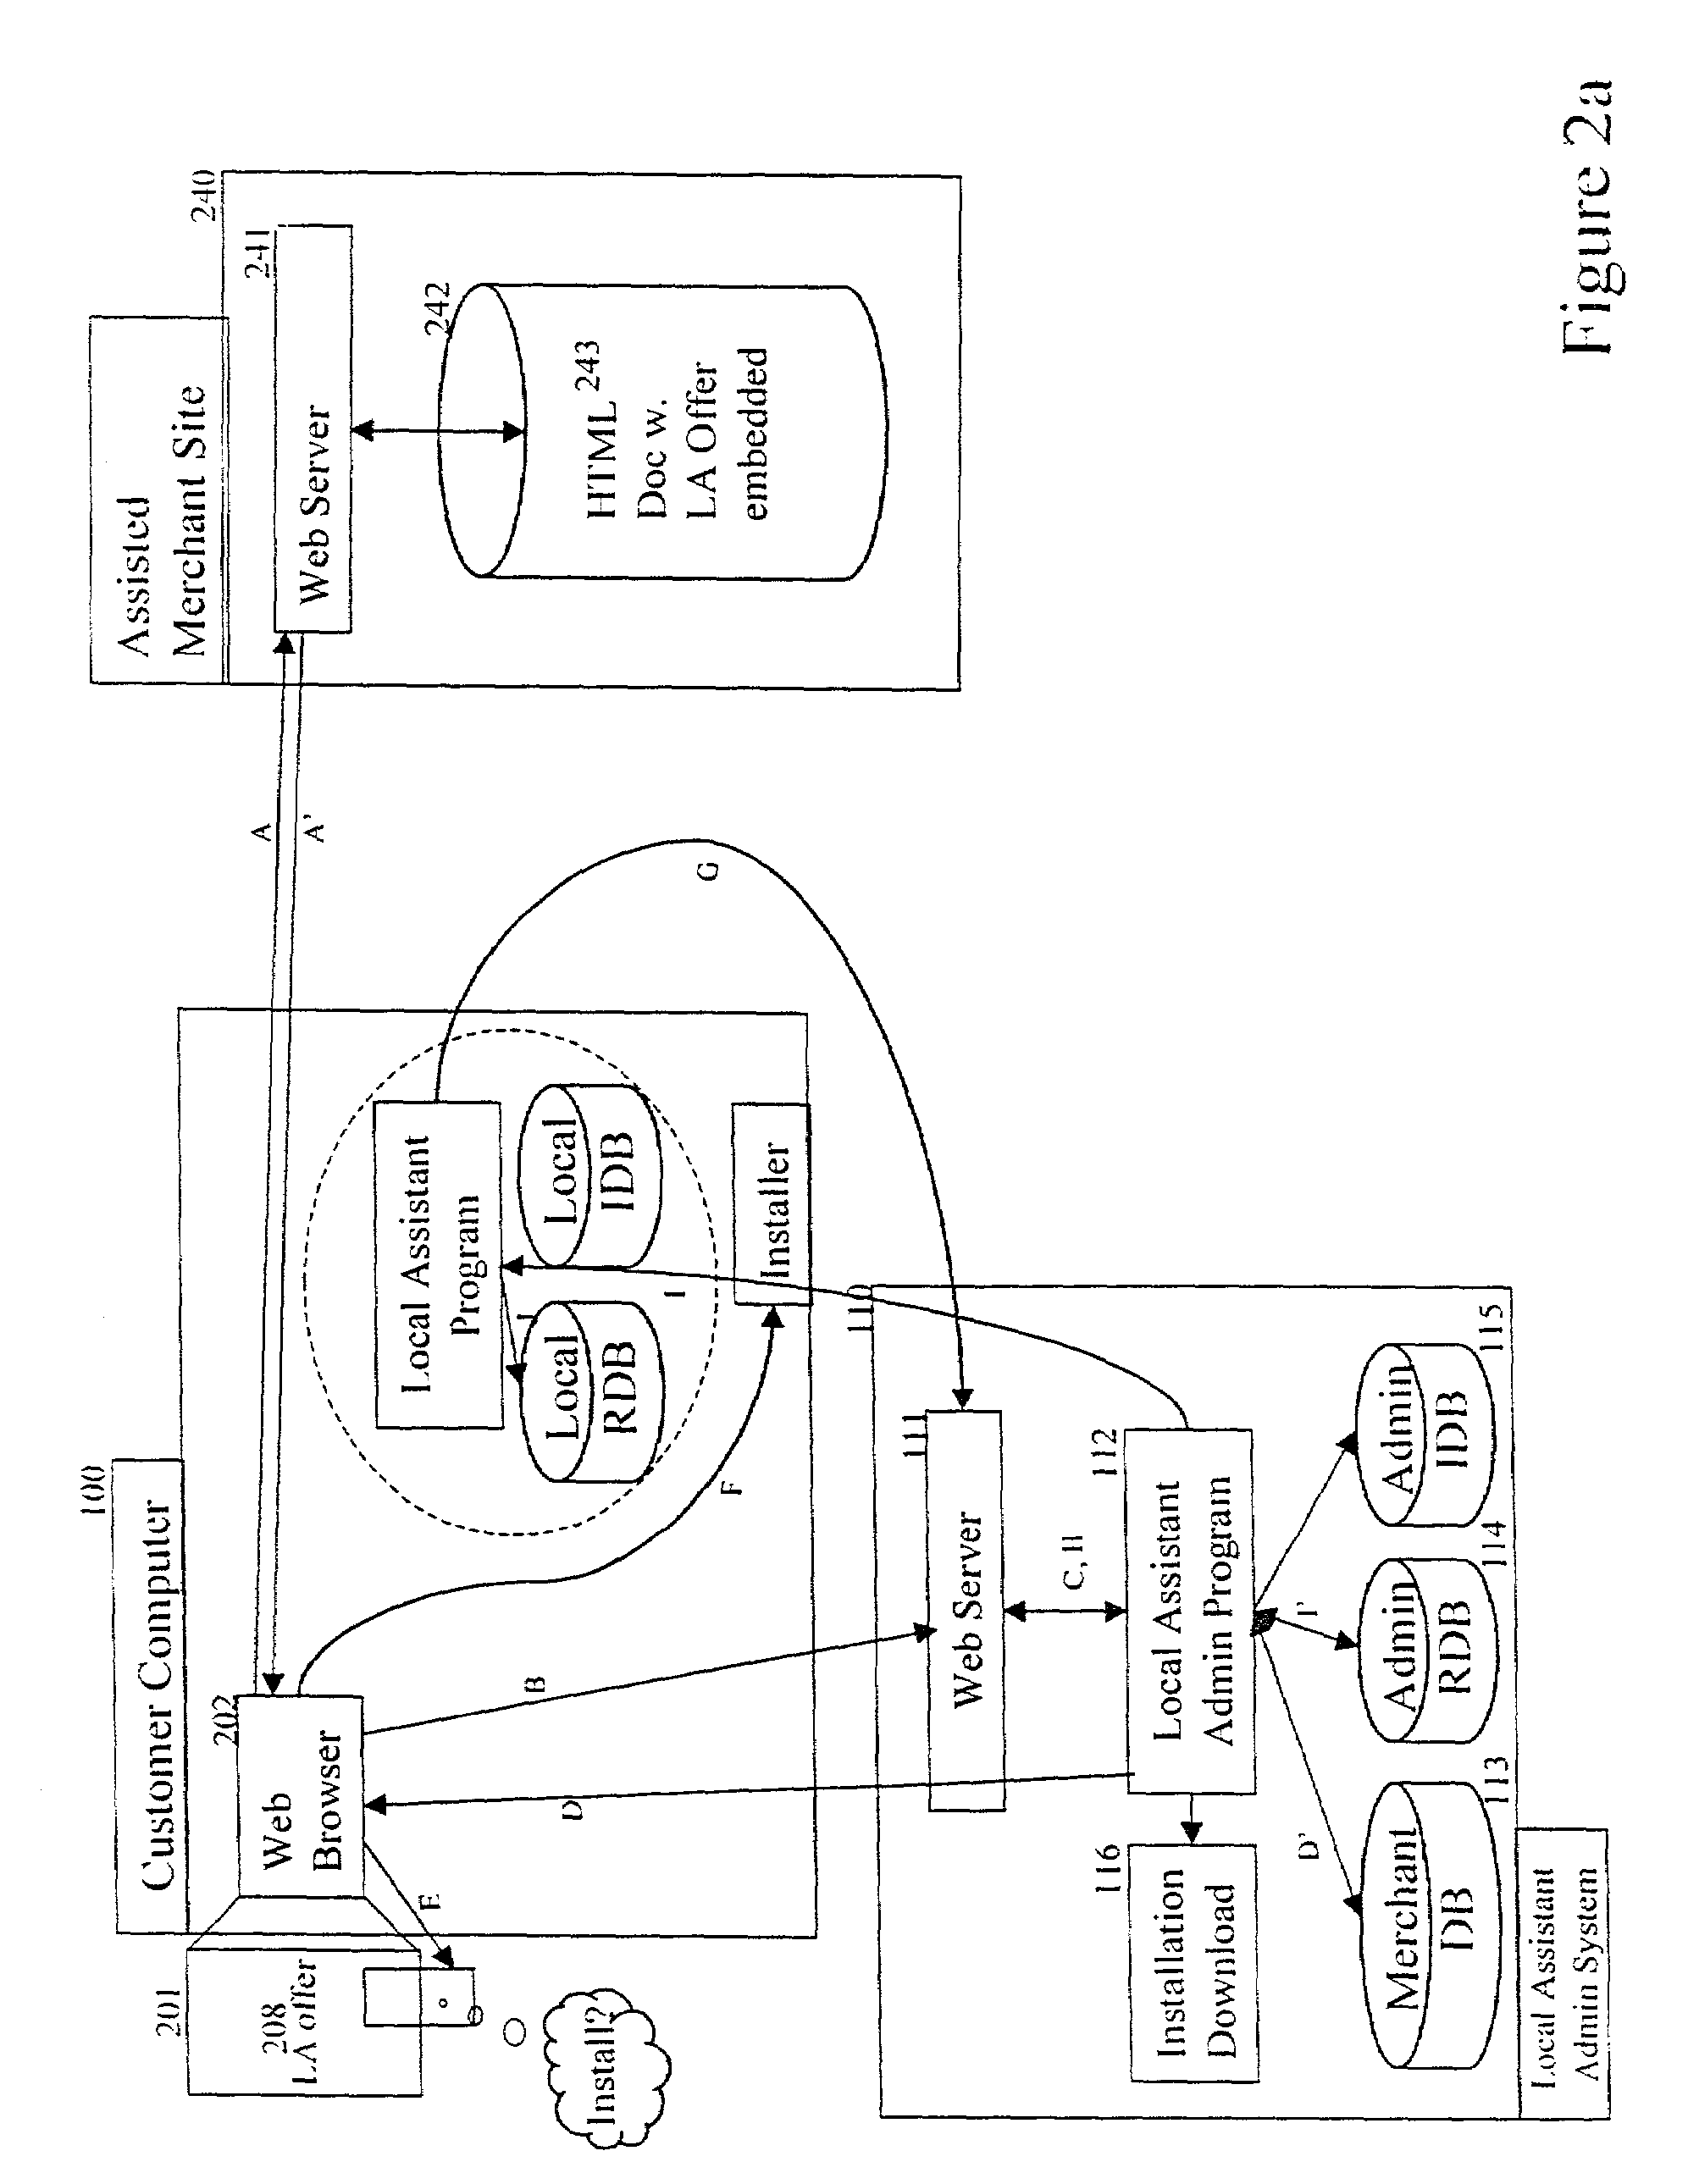 Method and system for modifying and transmitting data between a portable computer and a network